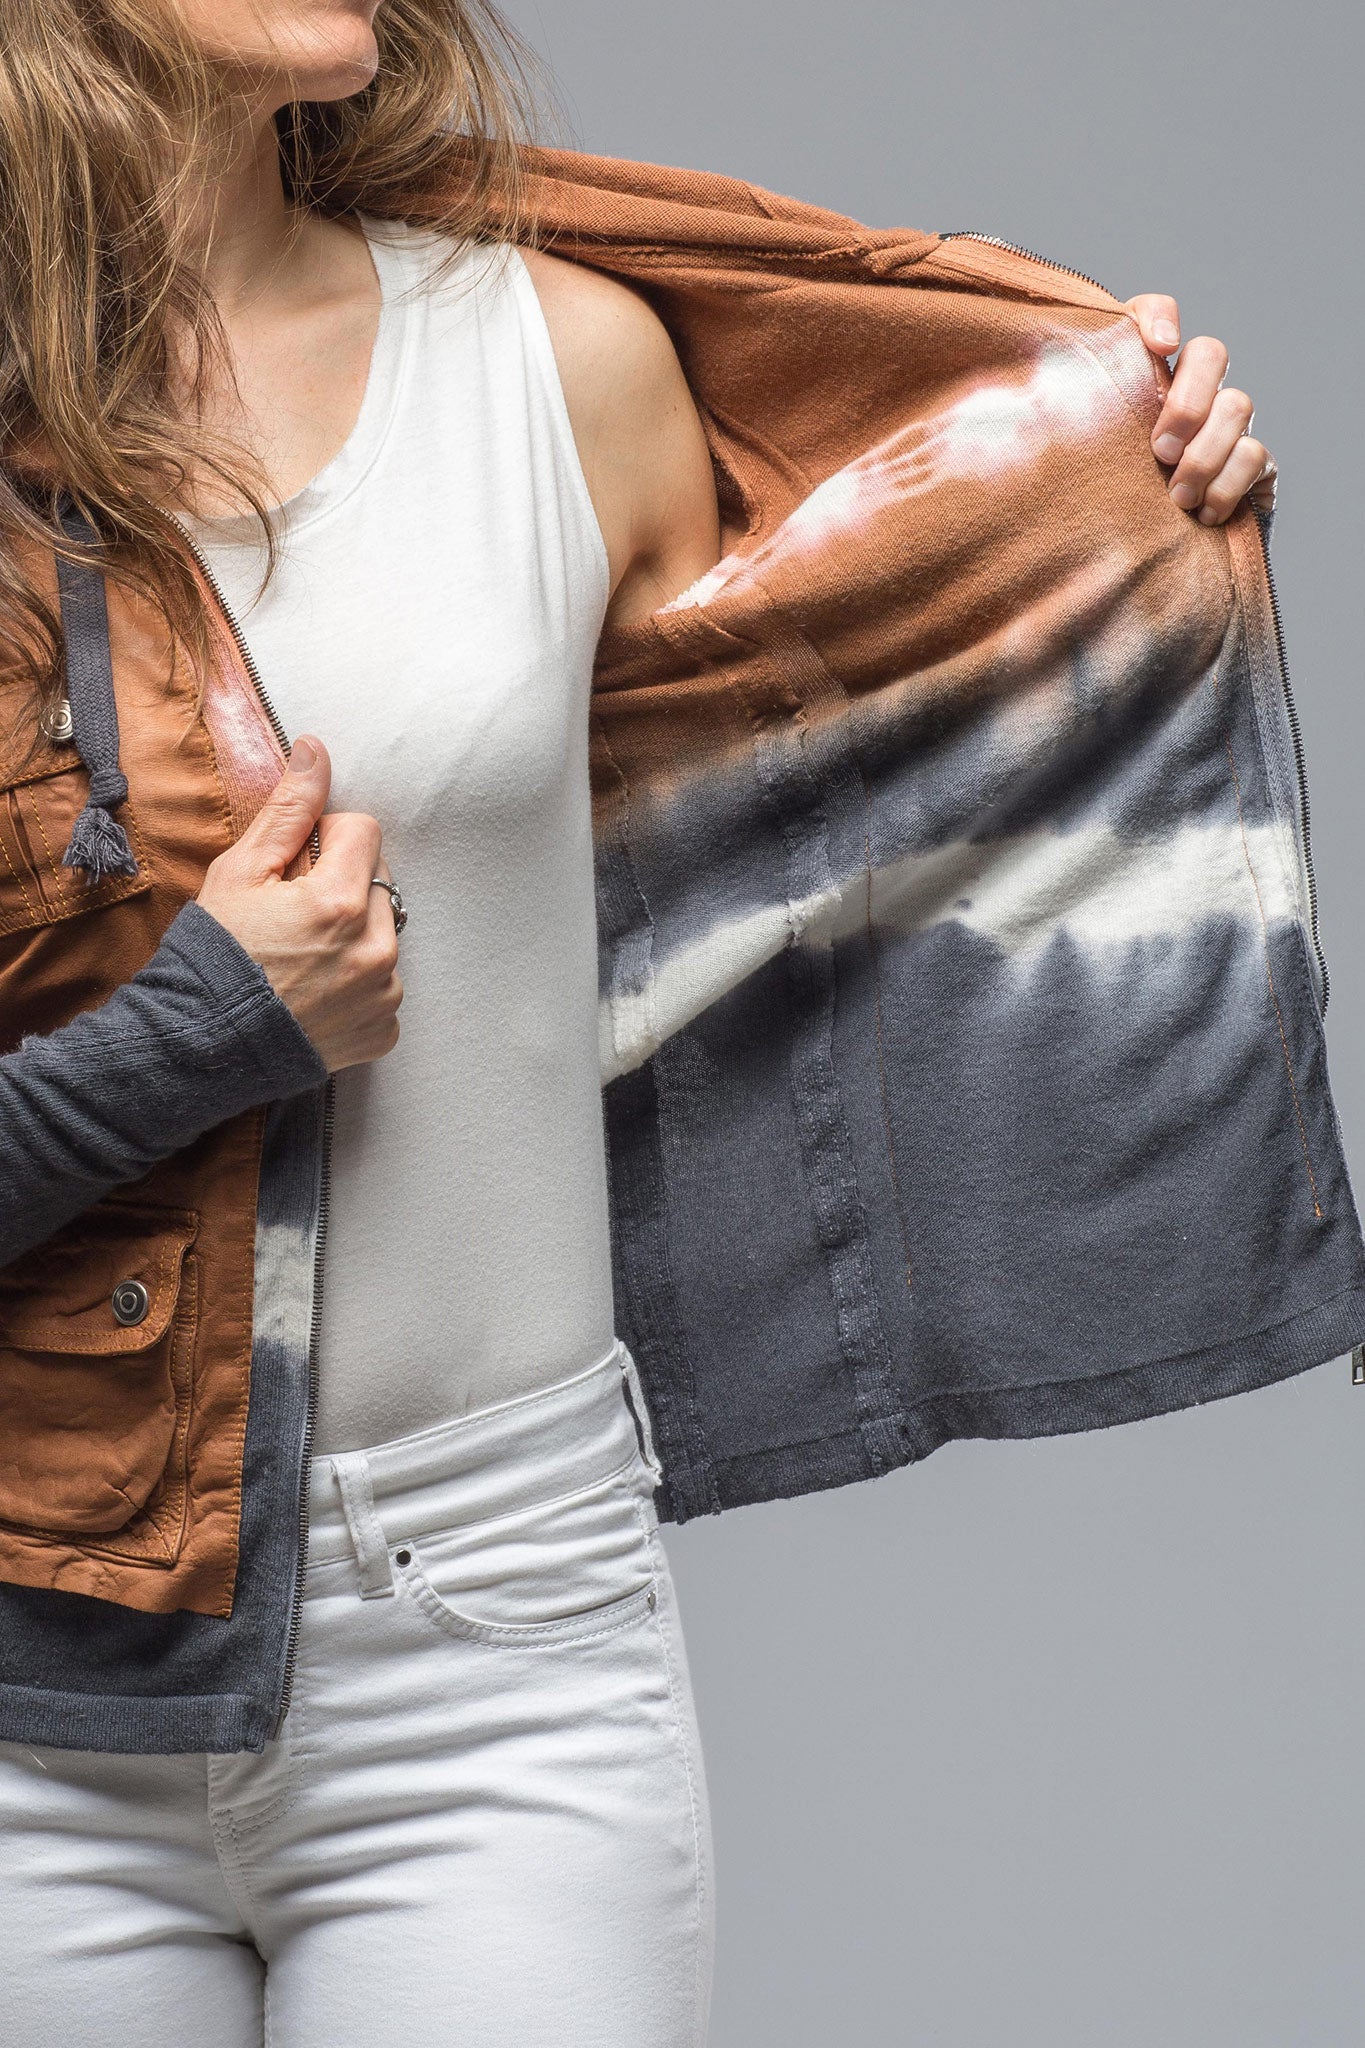 Solitude Hoodie In Brown, White, Grey Tie-Dye | Ladies - Outerwear - Leather | Roncarati